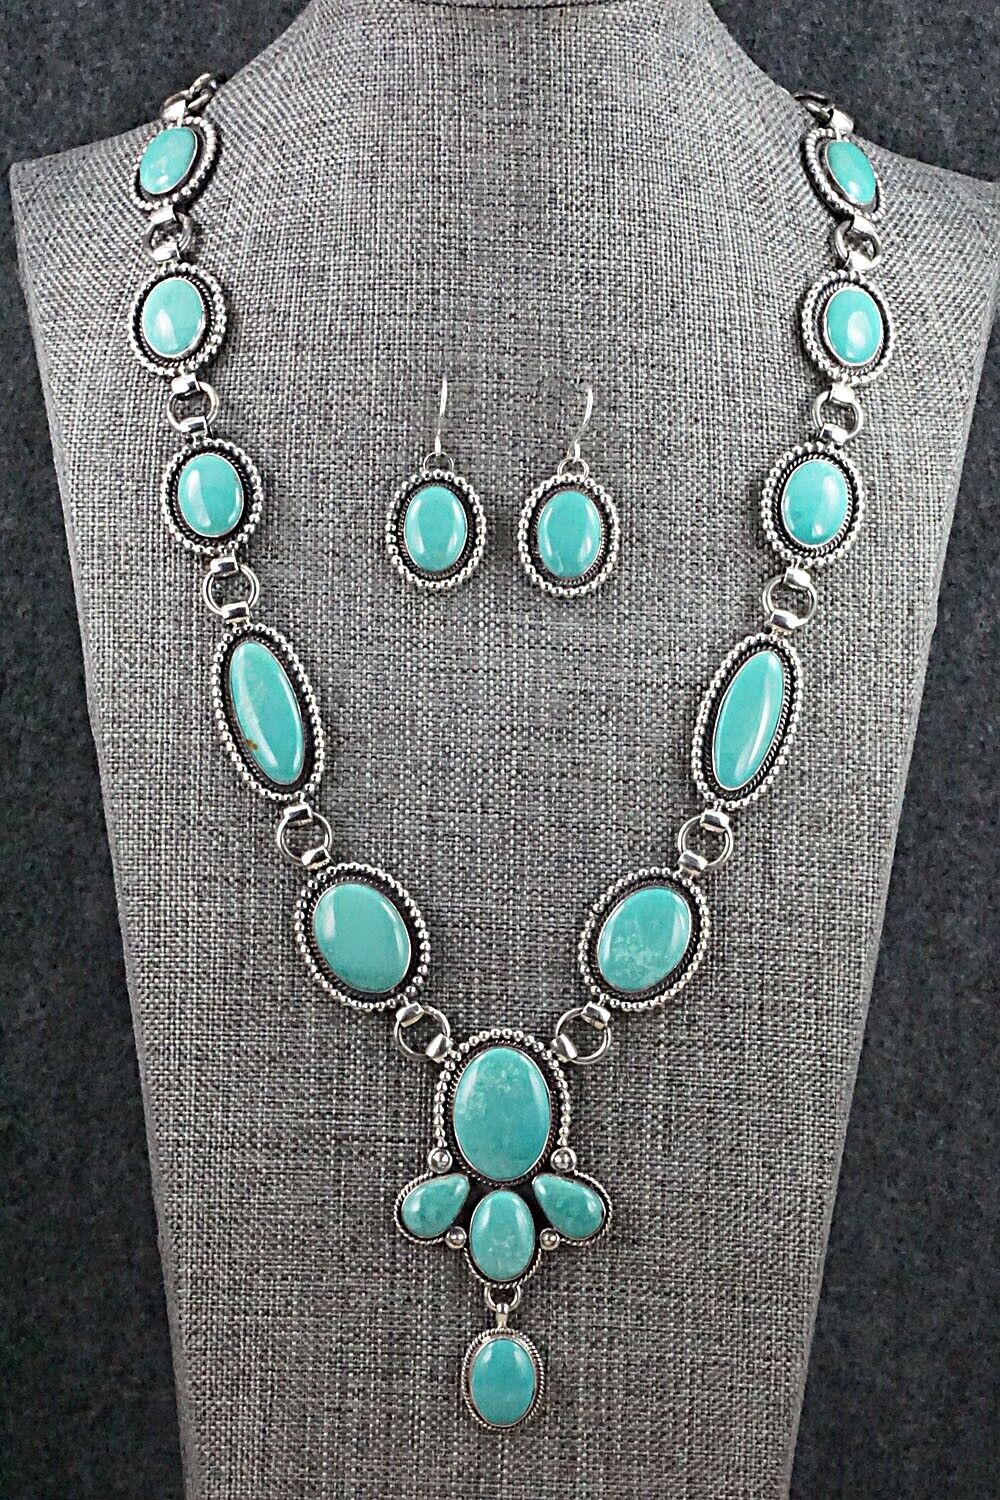 Turquoise & Sterling Silver Necklace and Earrings Set - Annie Hoskie